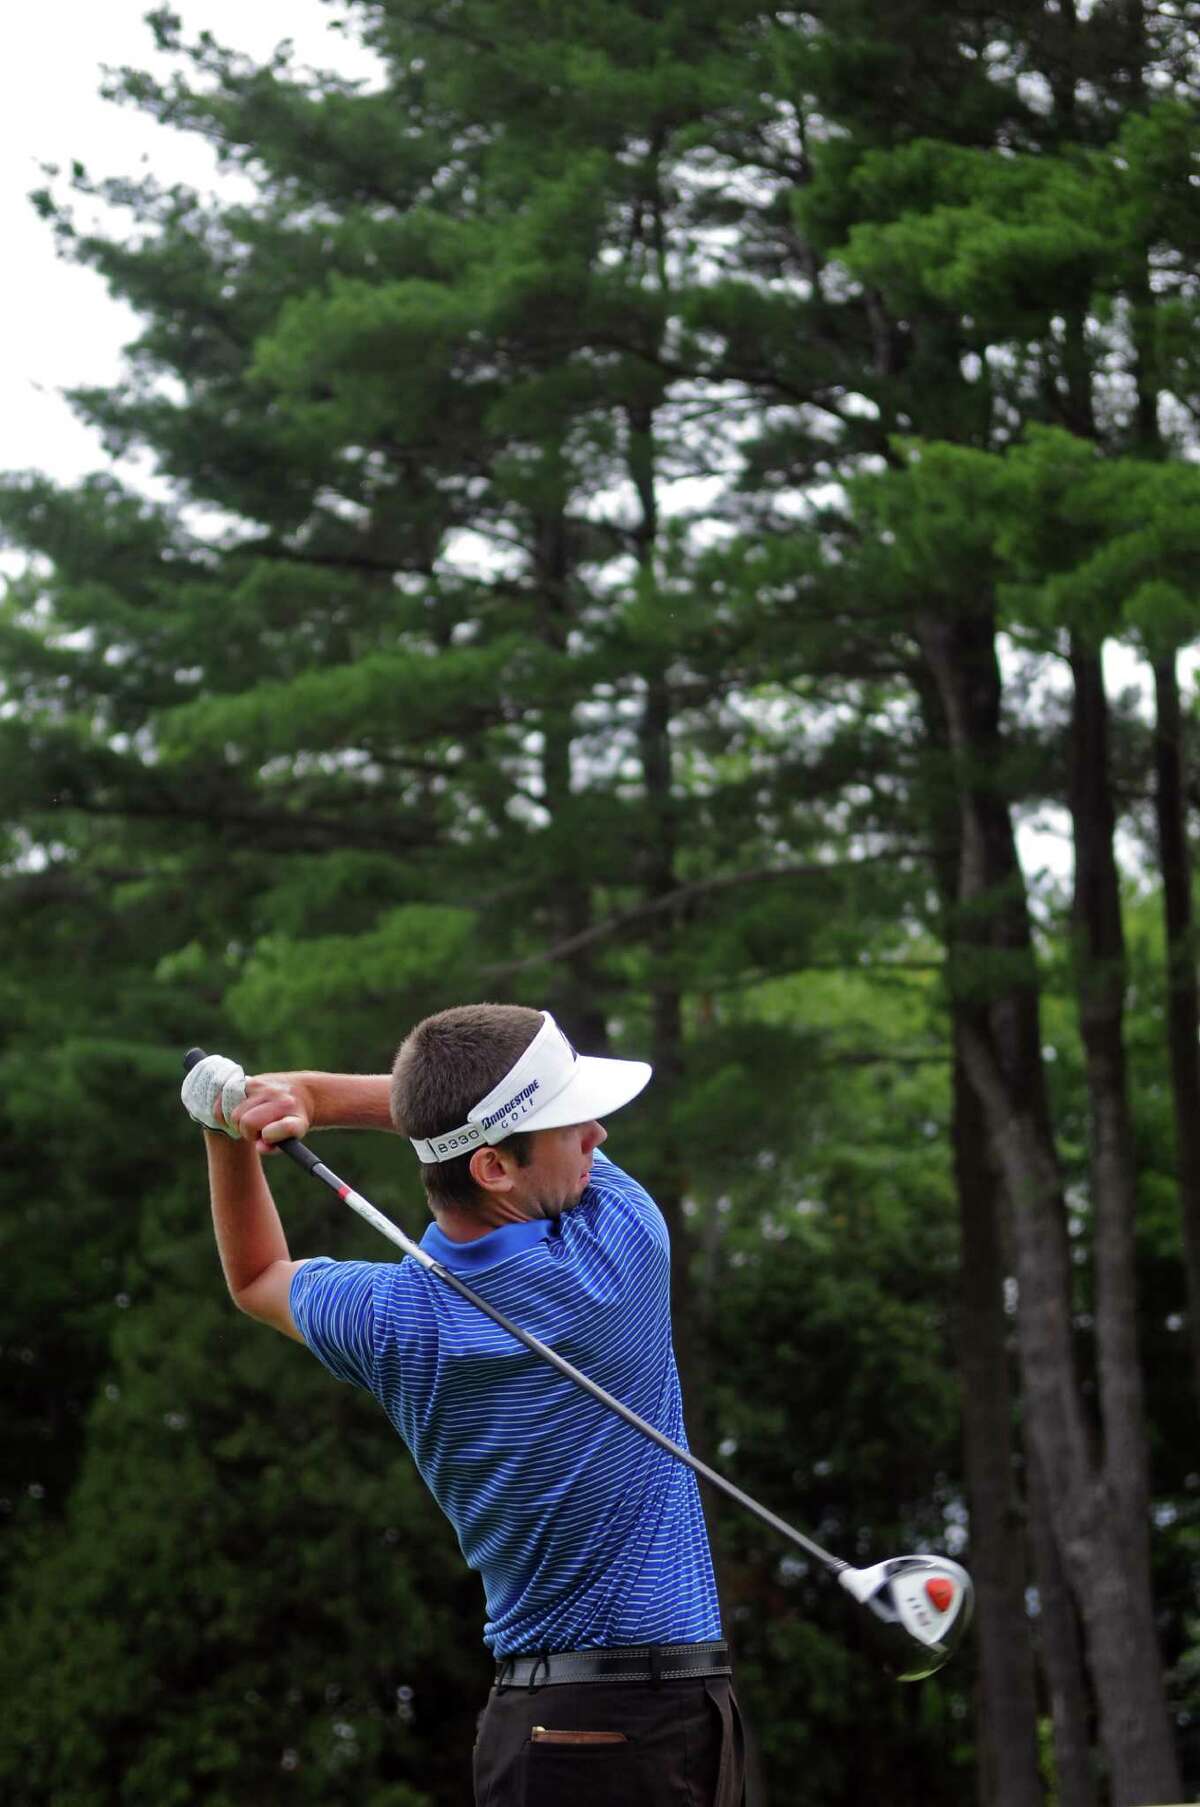 Casey Komline hits a drive on the 14th hole during the Troy Invitational at the Country Club of Troy on Sunday June 26, 2011 in Troy, NY. ( Philip Kamrass / Times Union)